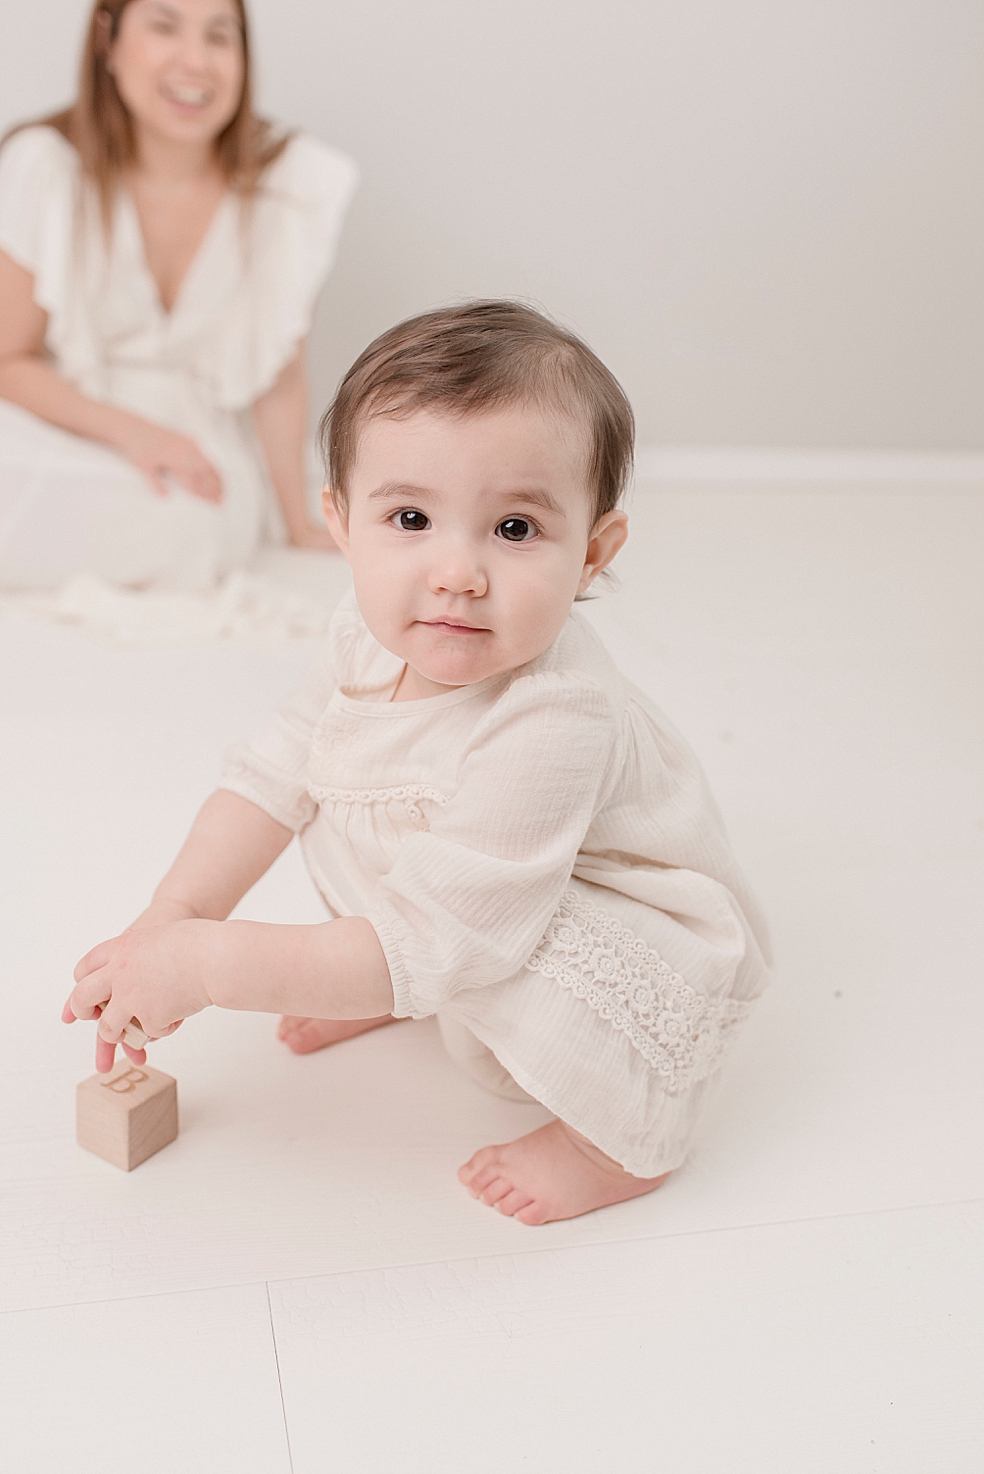 Baby girl in white playing with wooden blocks | Photo by Jessica Lee Photography